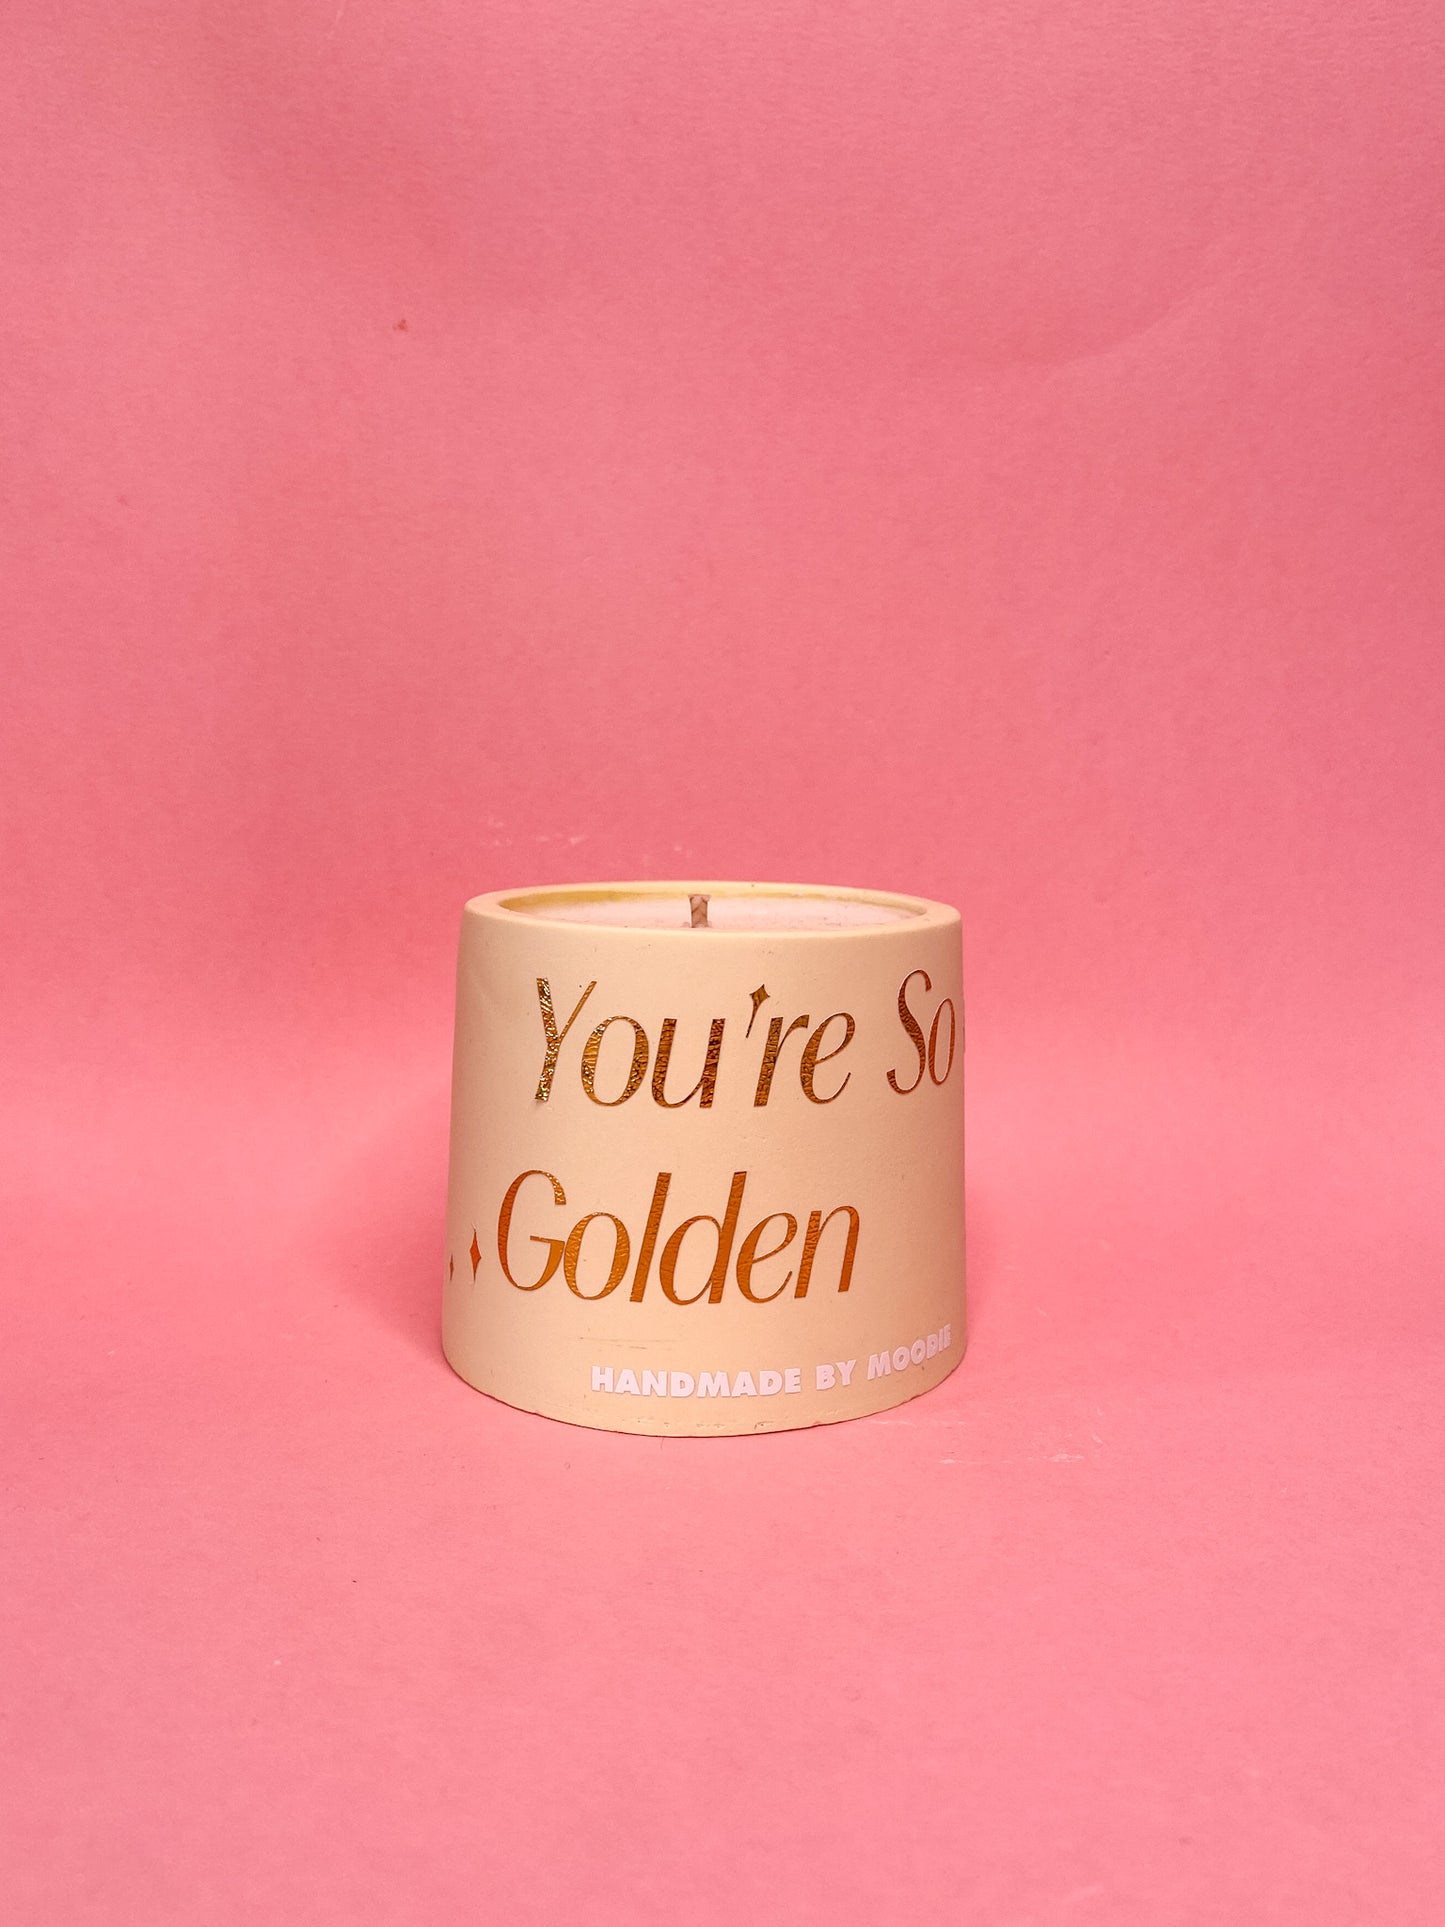 You're so Golden Premium Soy Blend Candle